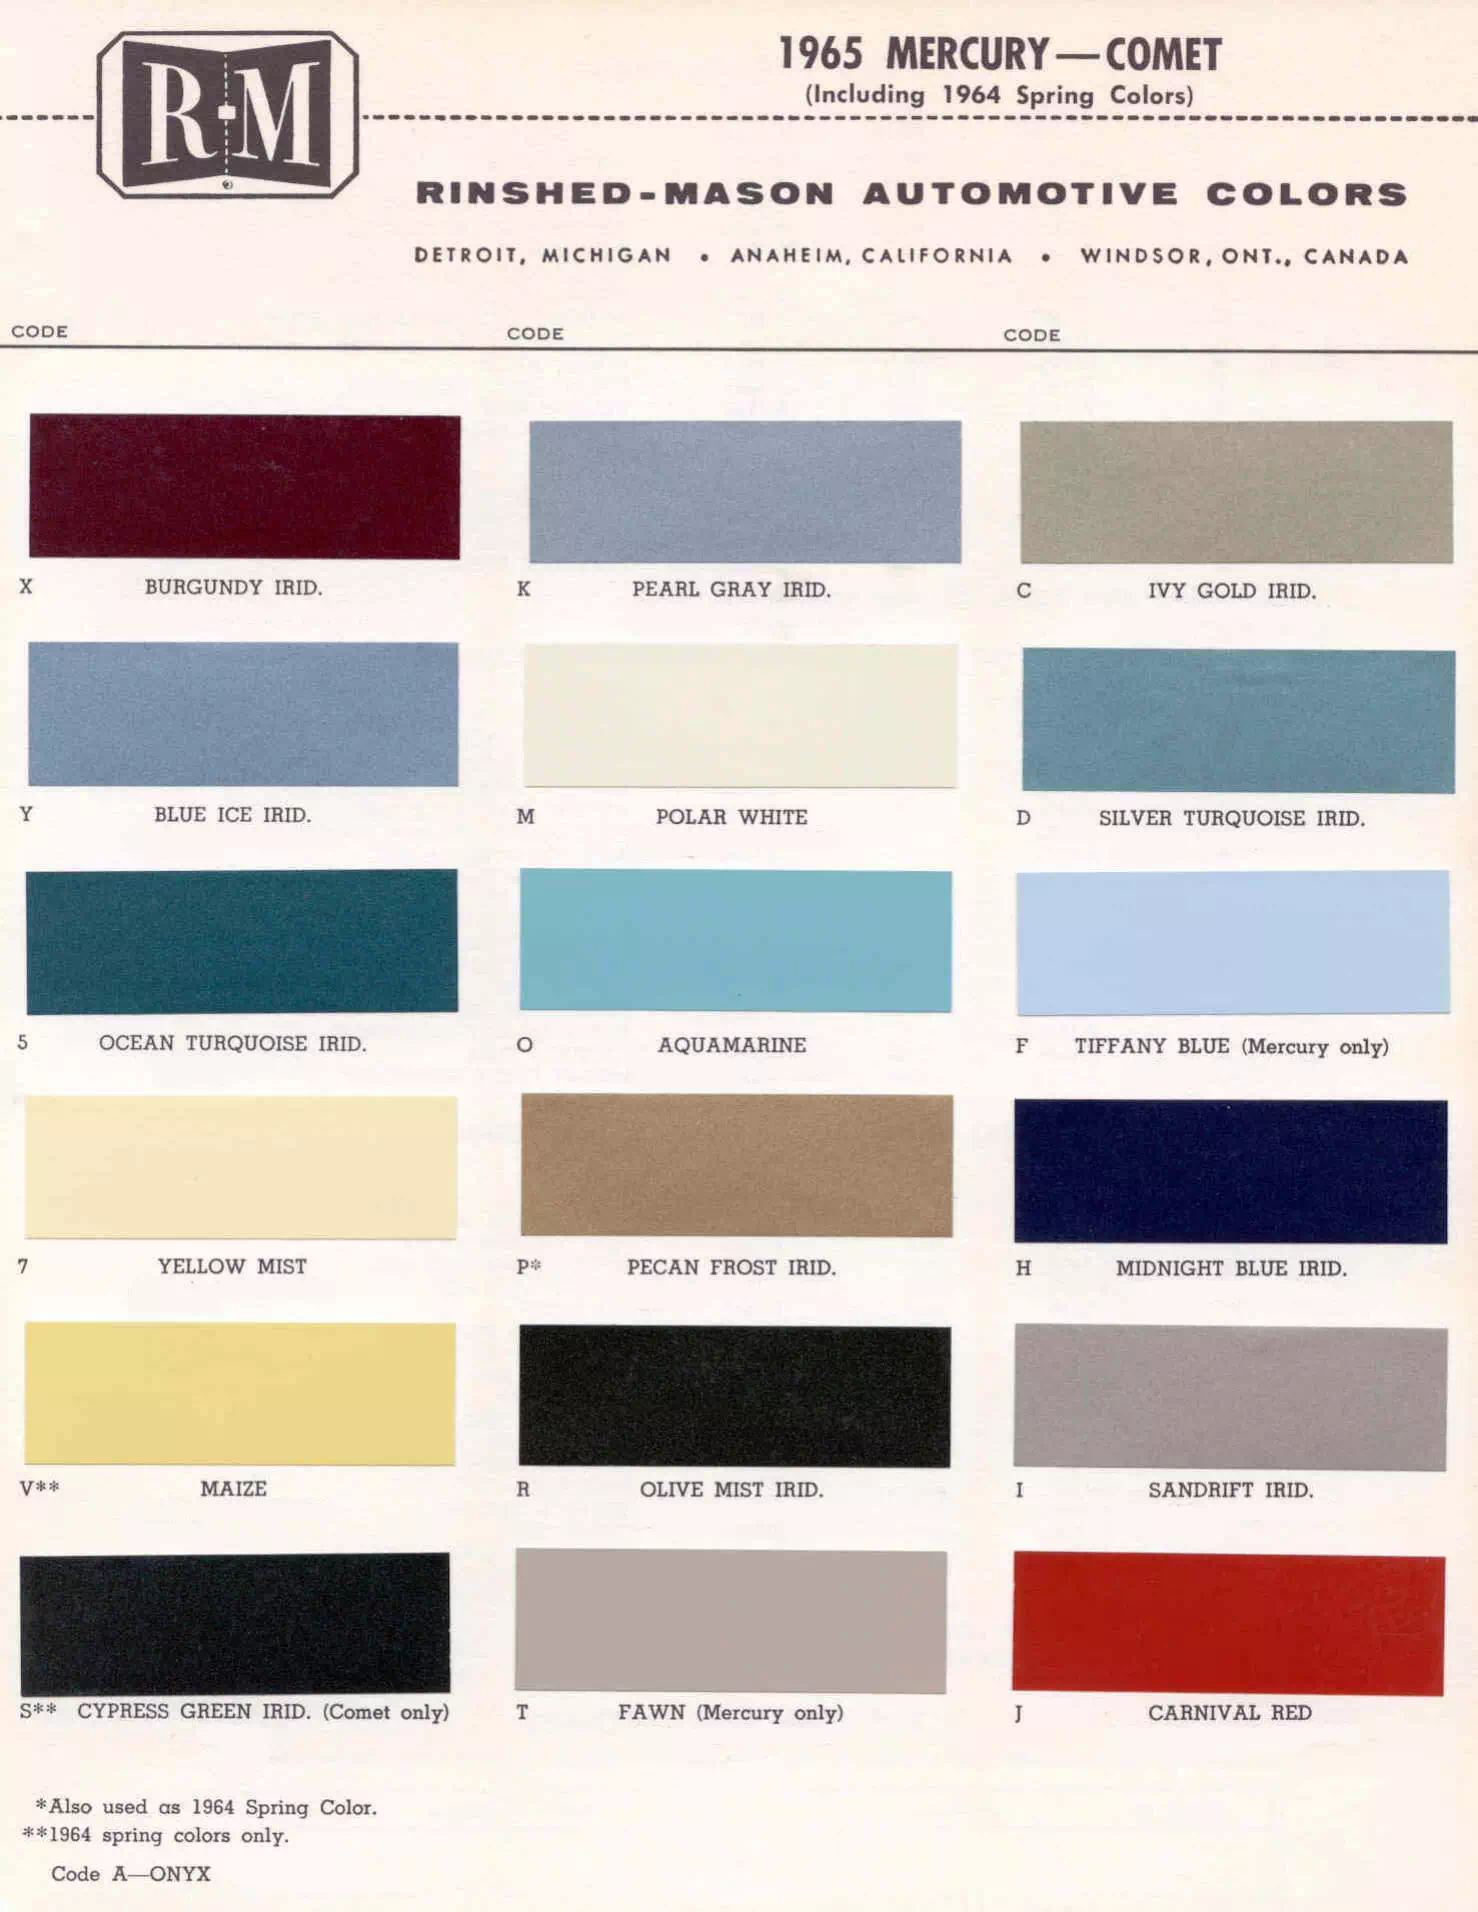 Color examples, Ordering Codes, OEM Paint Code, Color Swatches, and Color Names for the Ford Motor Company in 1965